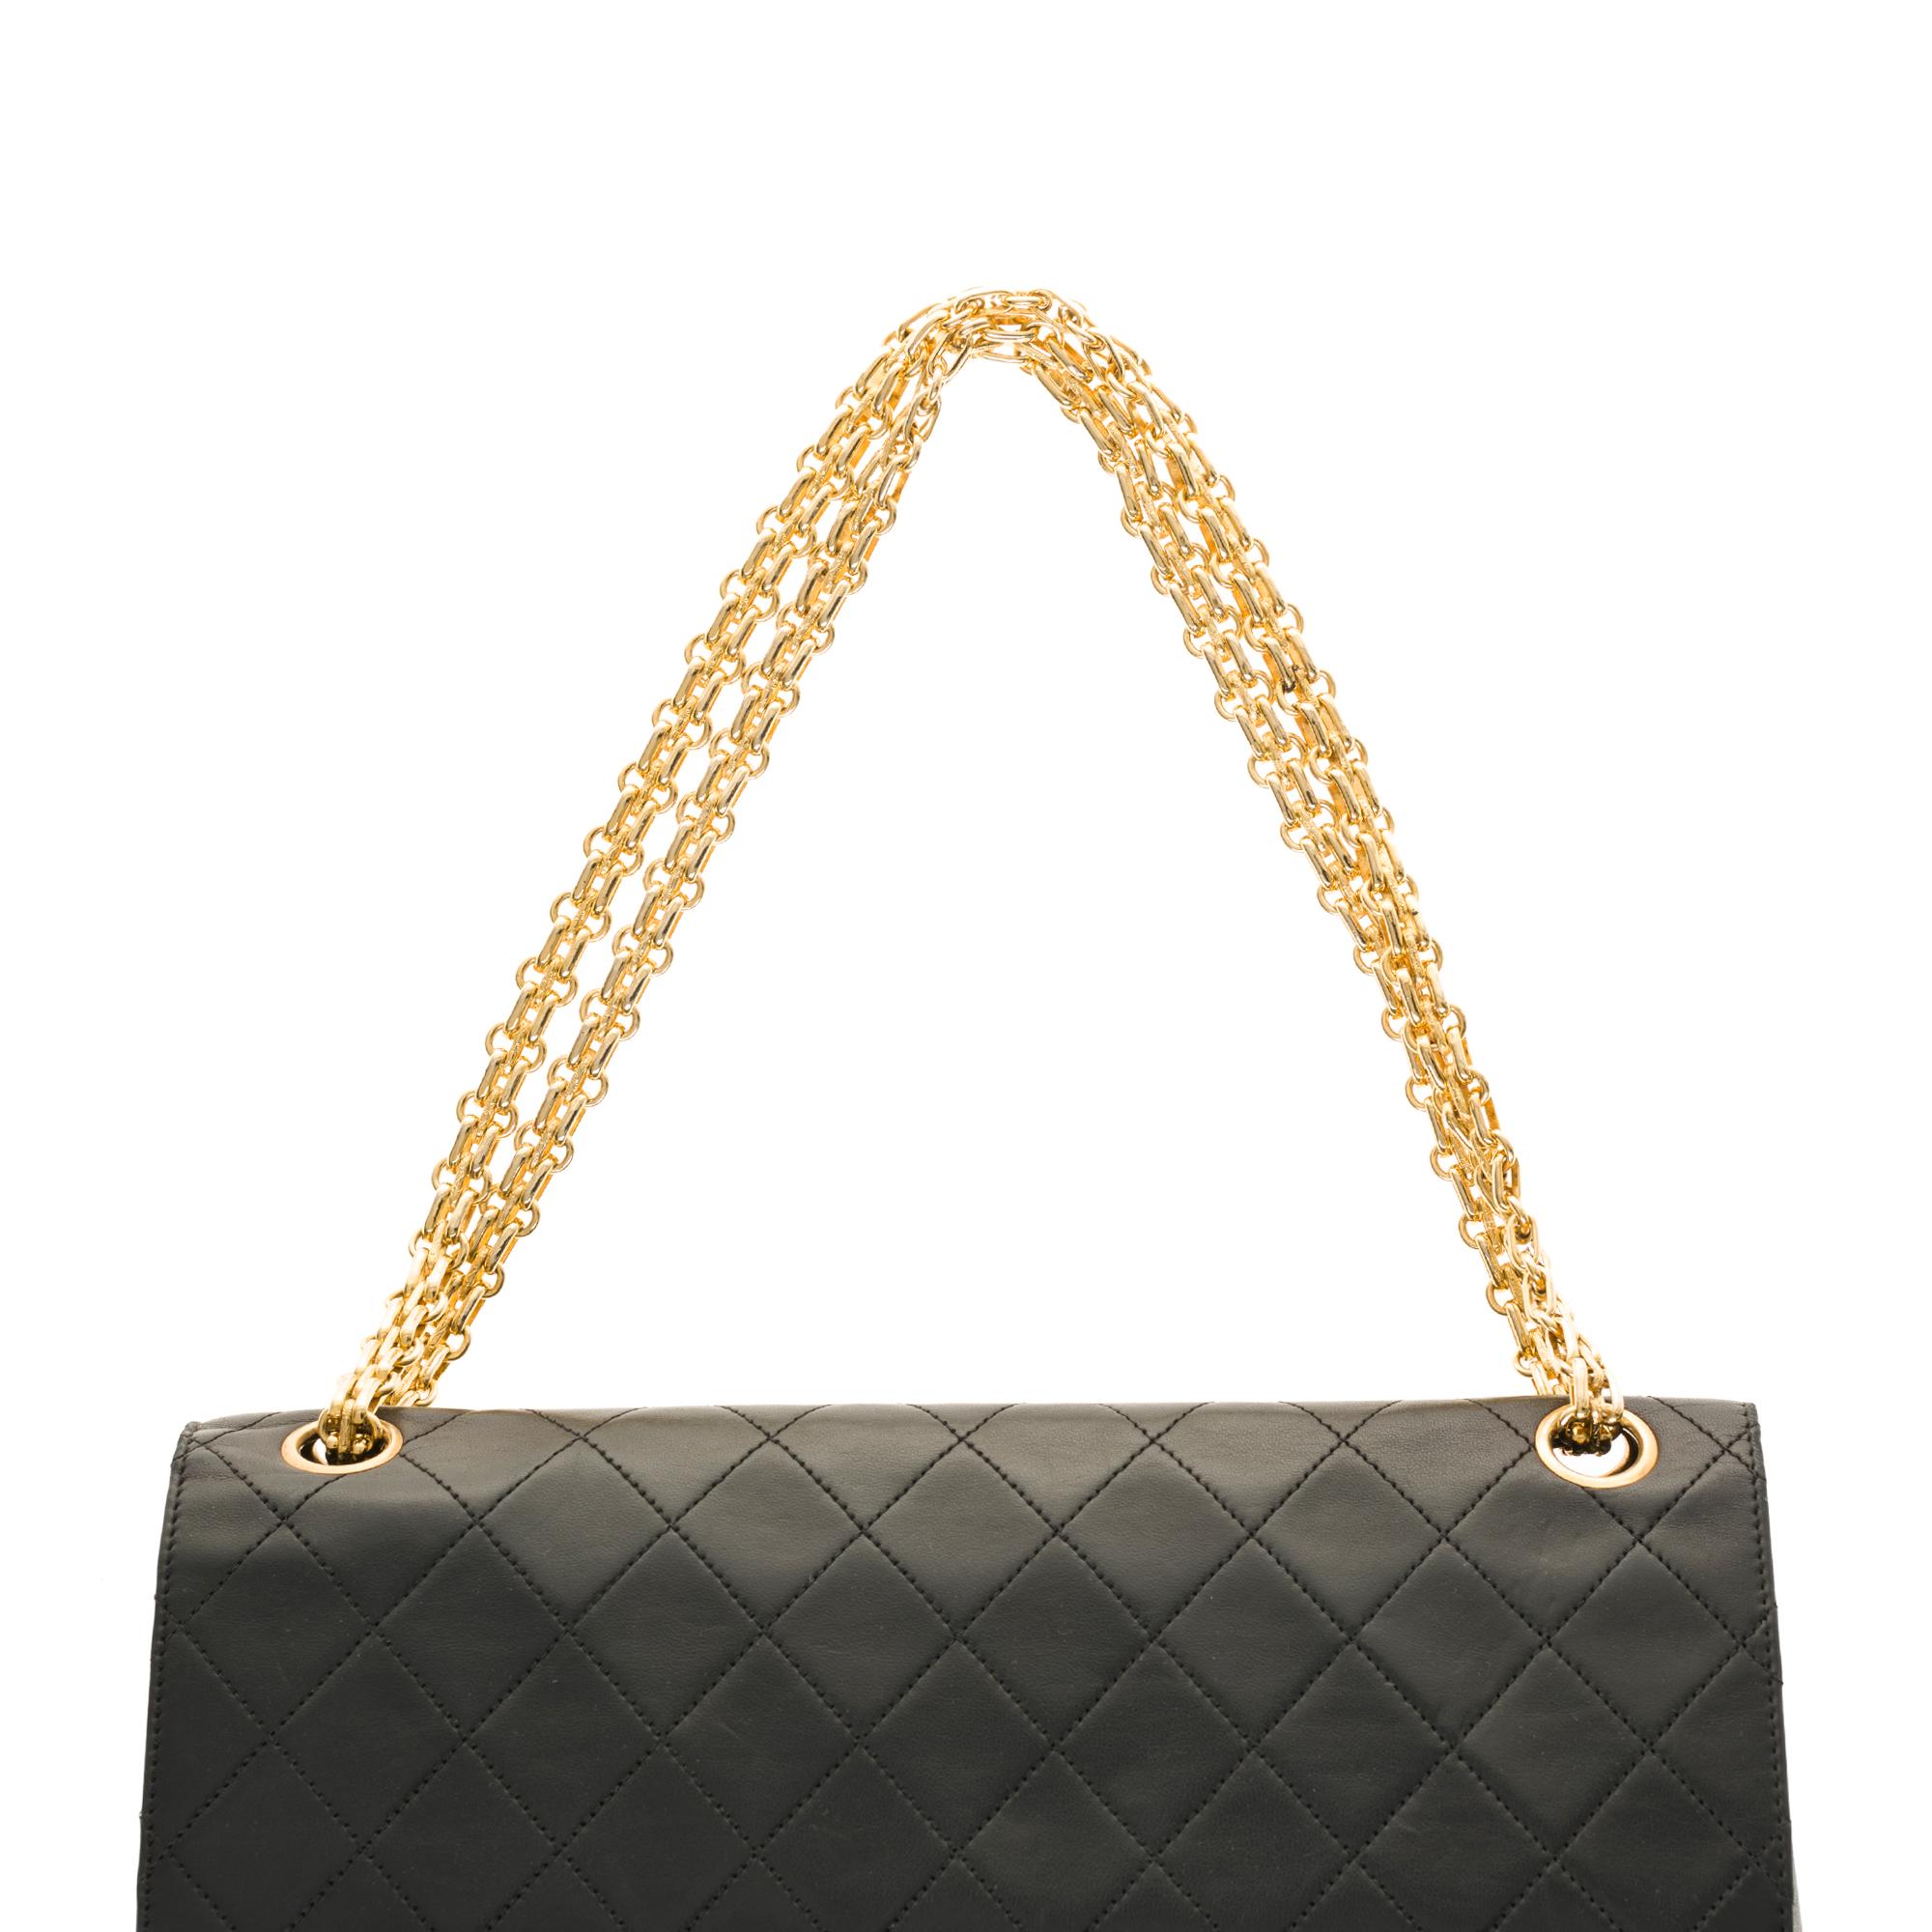 Chanel Classic shoulder bag in black quilted lambskin and gold hardware 2